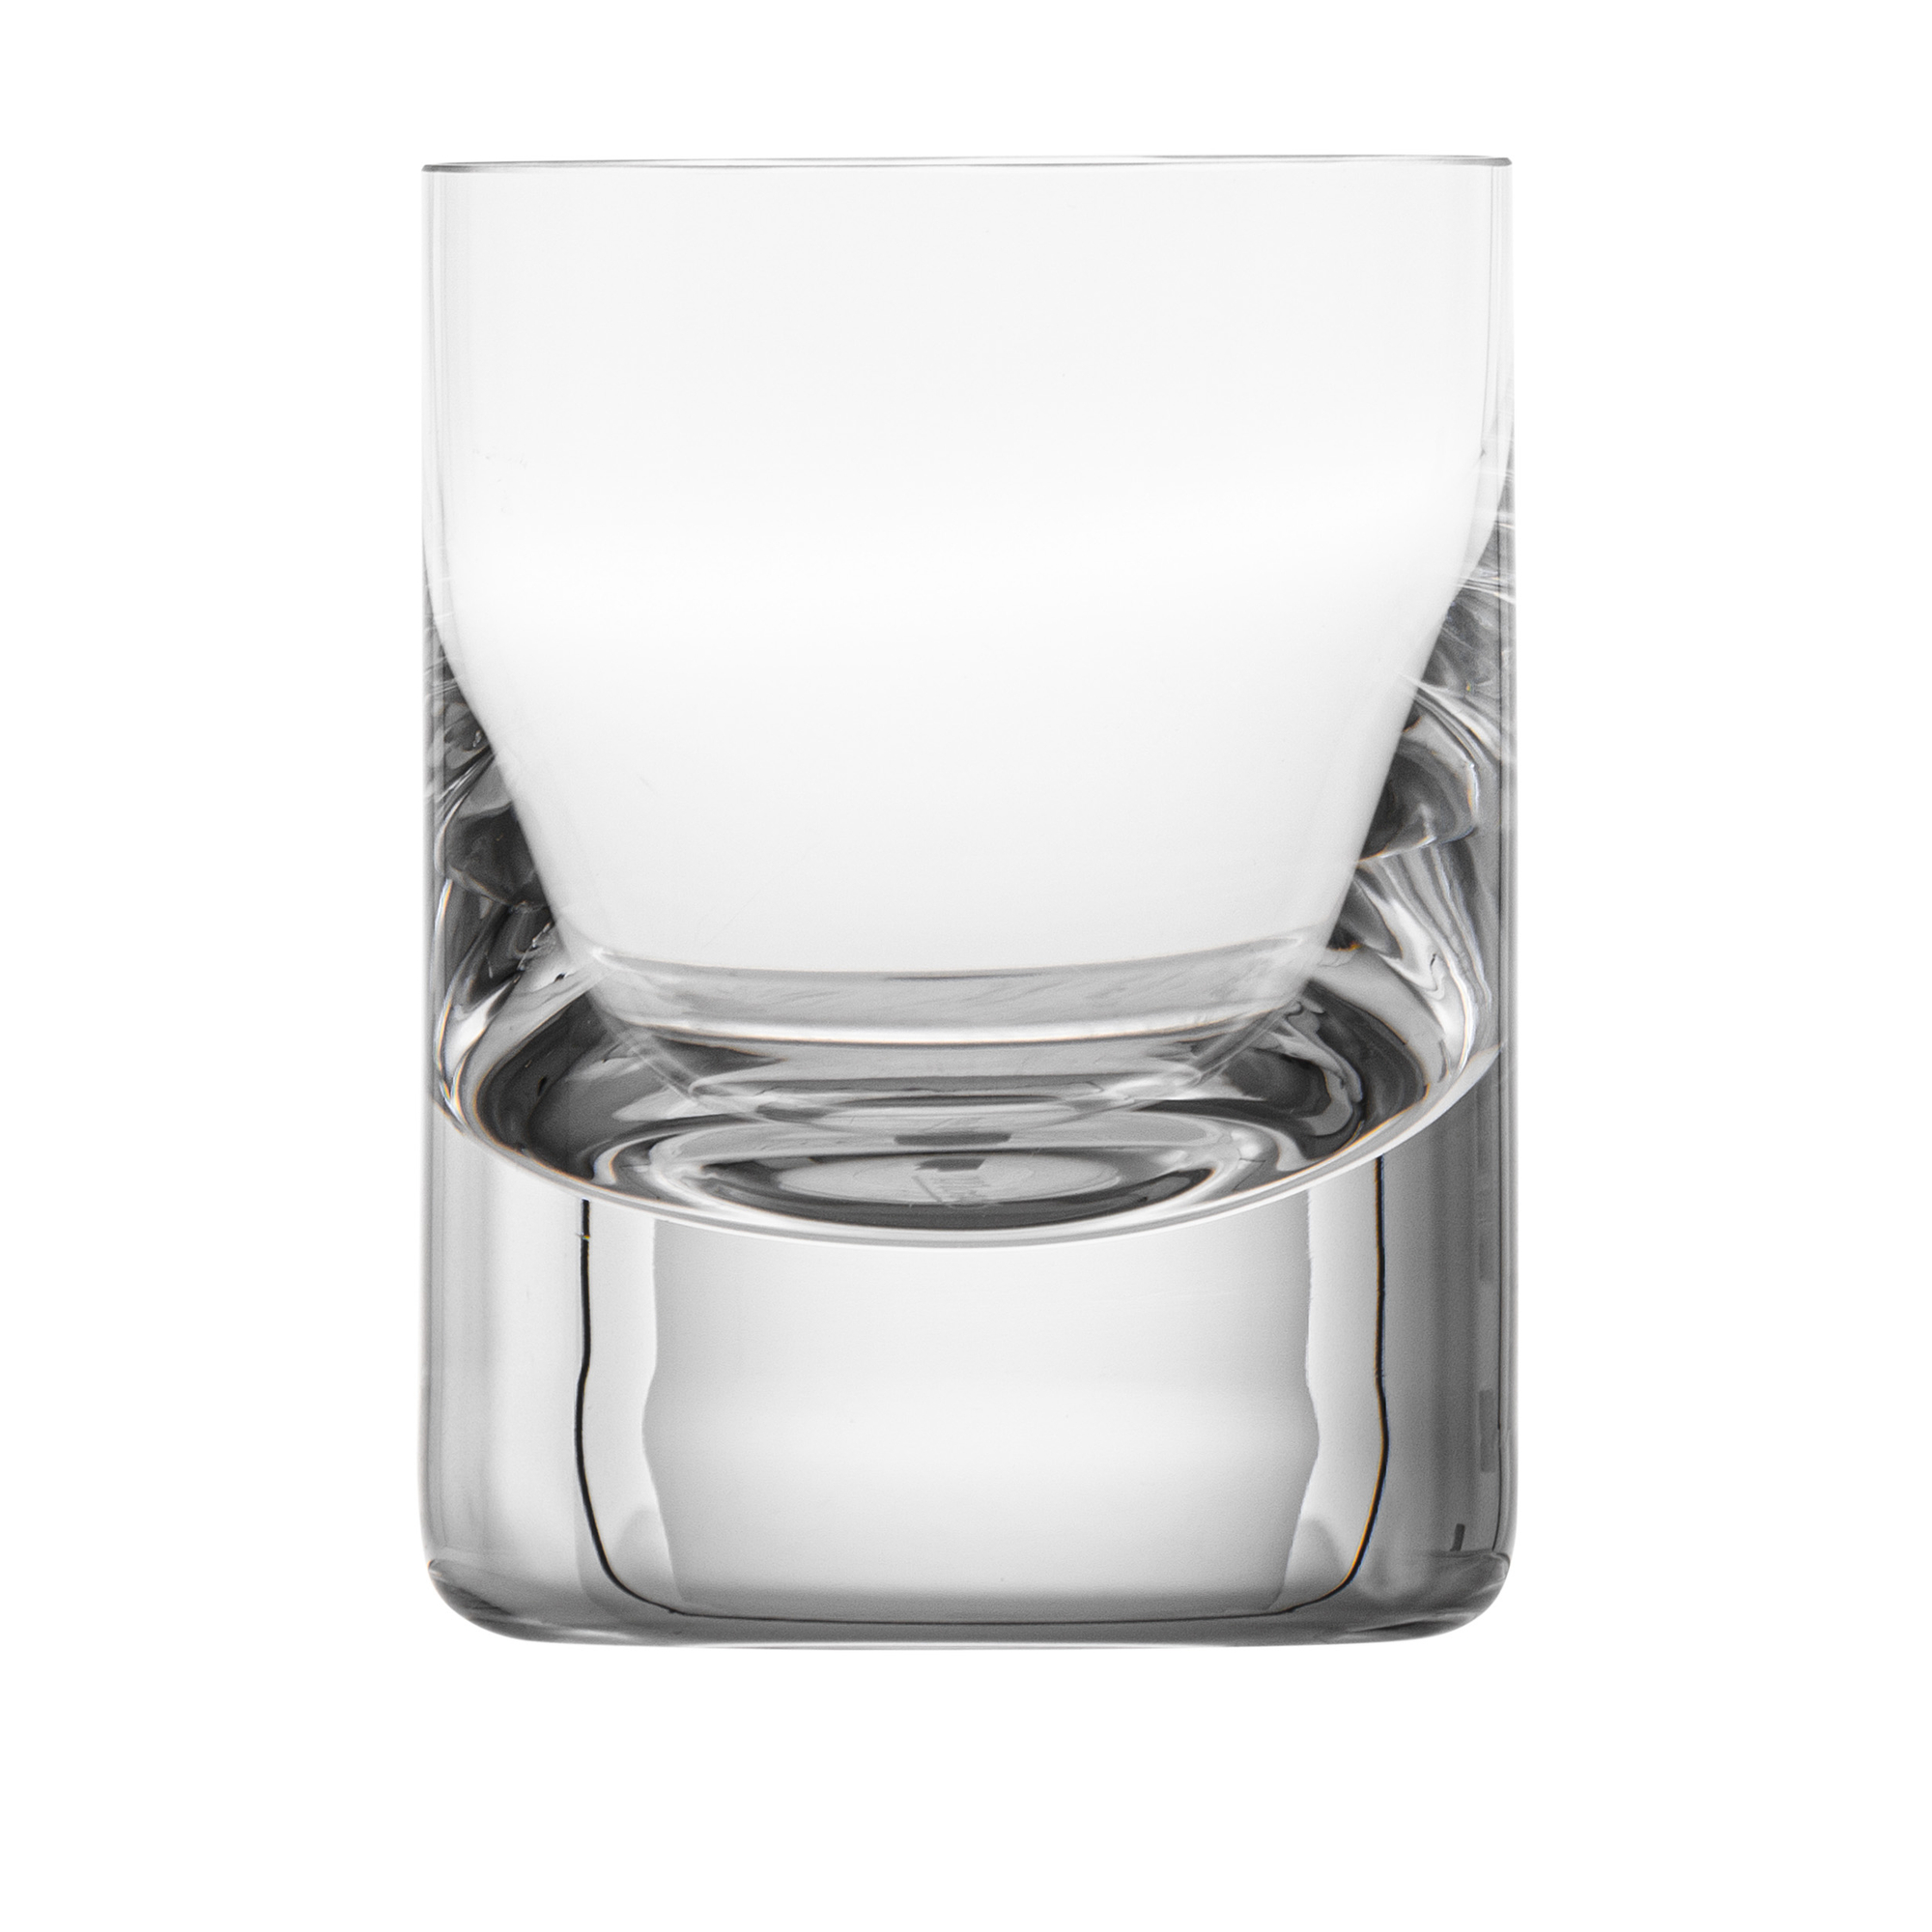 https://www.moser.com/ver/20221031140710/variant/eshop/product/edeeshop/moser/product/hlavni-motiv-product-detail/07357/whisky-clear/2000x2000.jpg